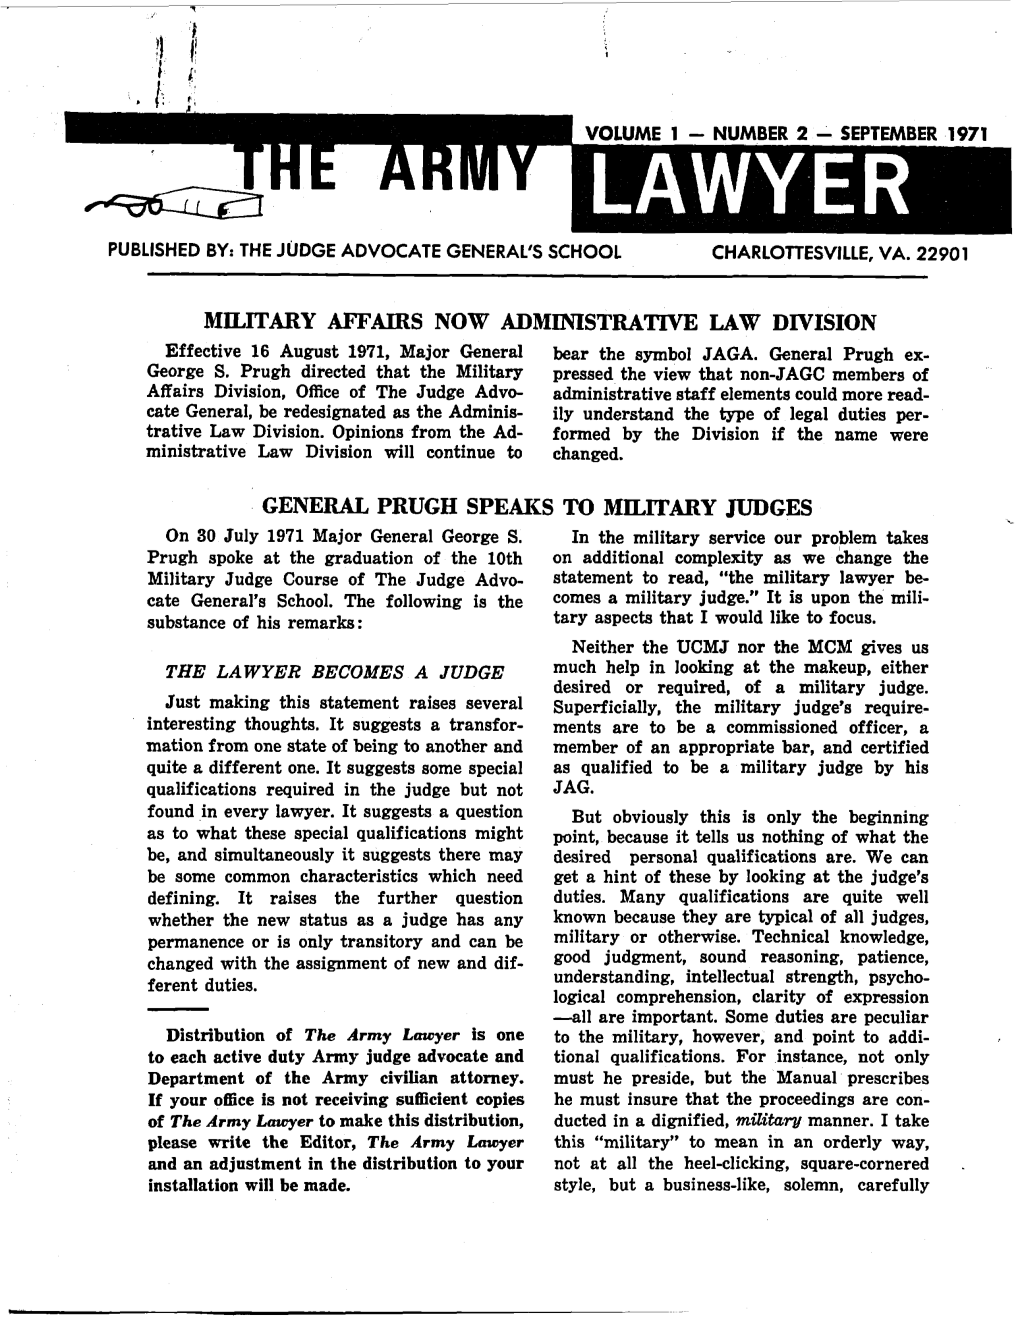 The Army Lawyer (Sep